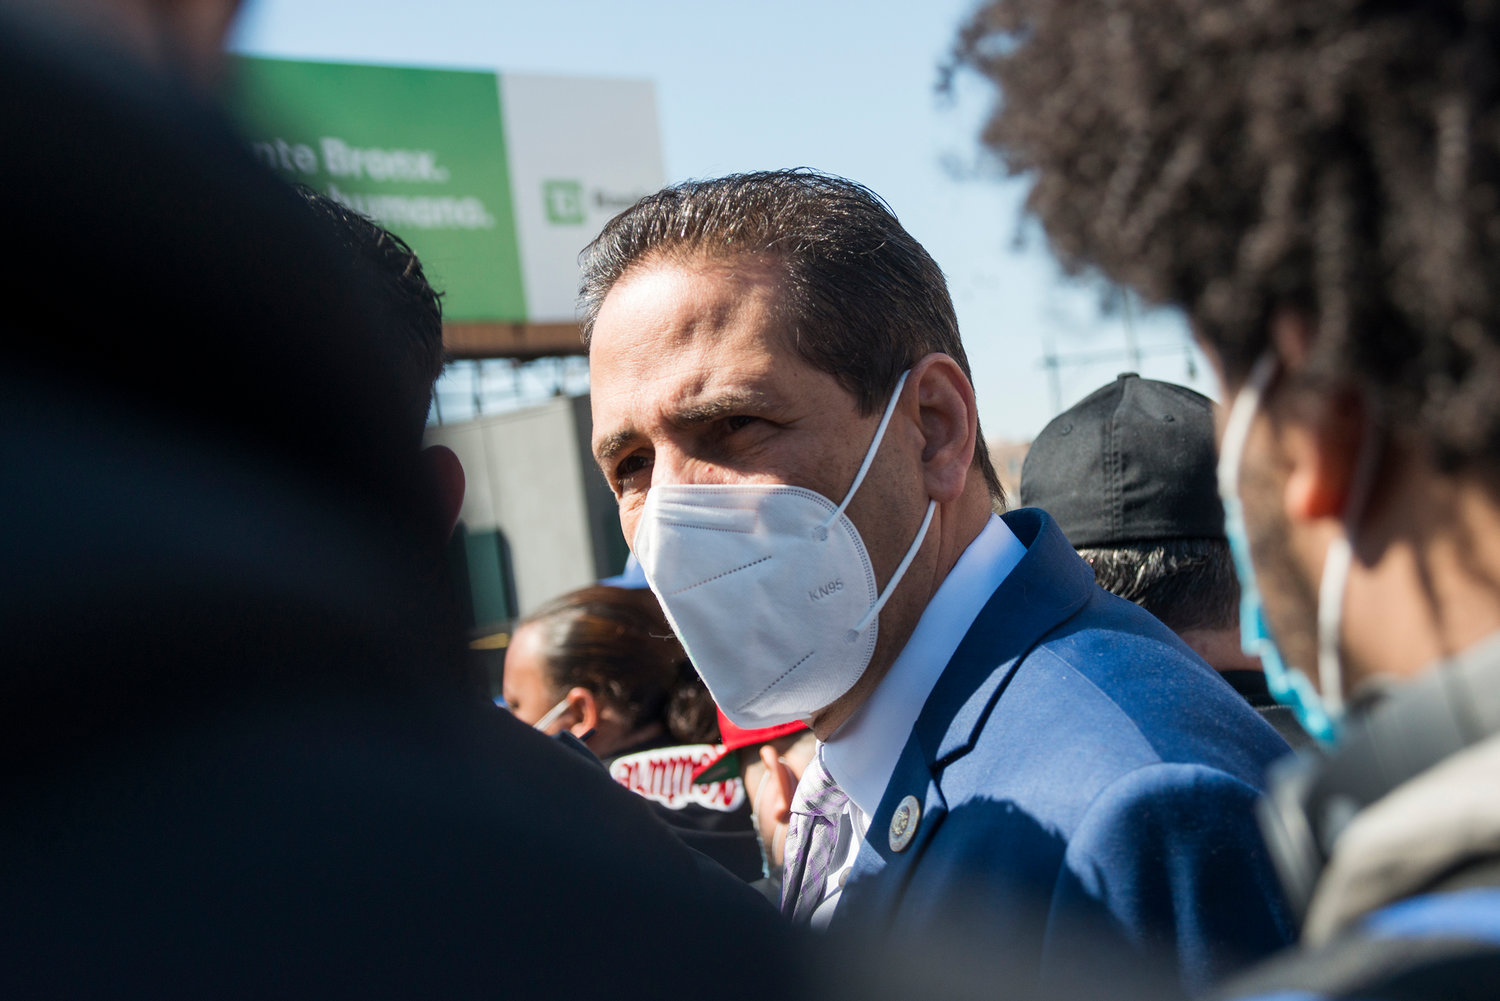 Councilman Fernando Cabrera says revitalizing the Bronx’s economy after the coronavirus pandemic would be his top priority as borough president. Cabrera is one of five candidates running in a June 22 Democratic primary to replace Ruben Diaz Jr., in borough hall.